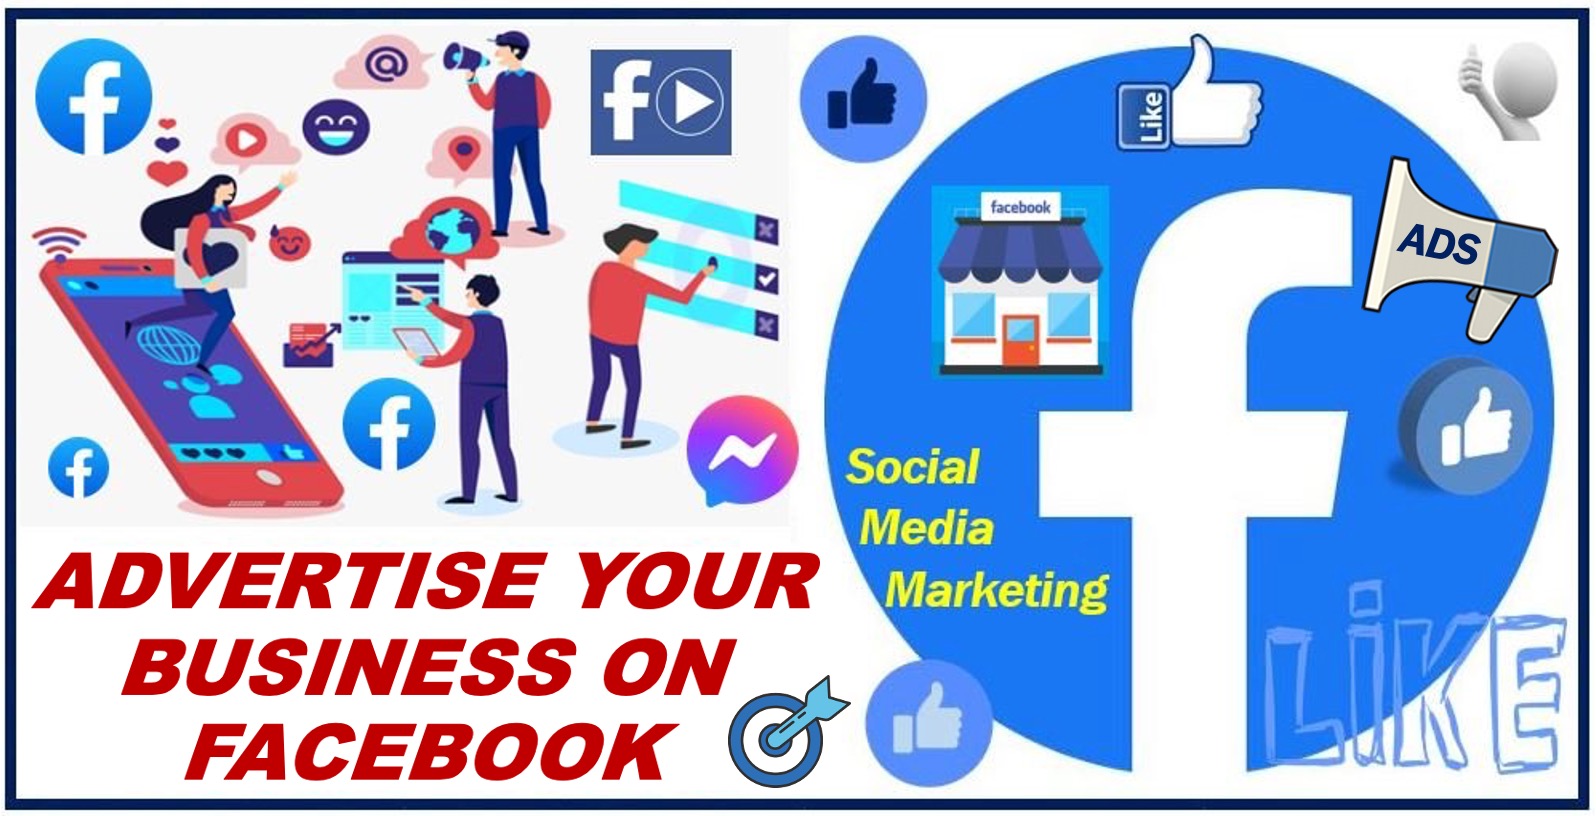 Using Facebook Advertising for Your Business